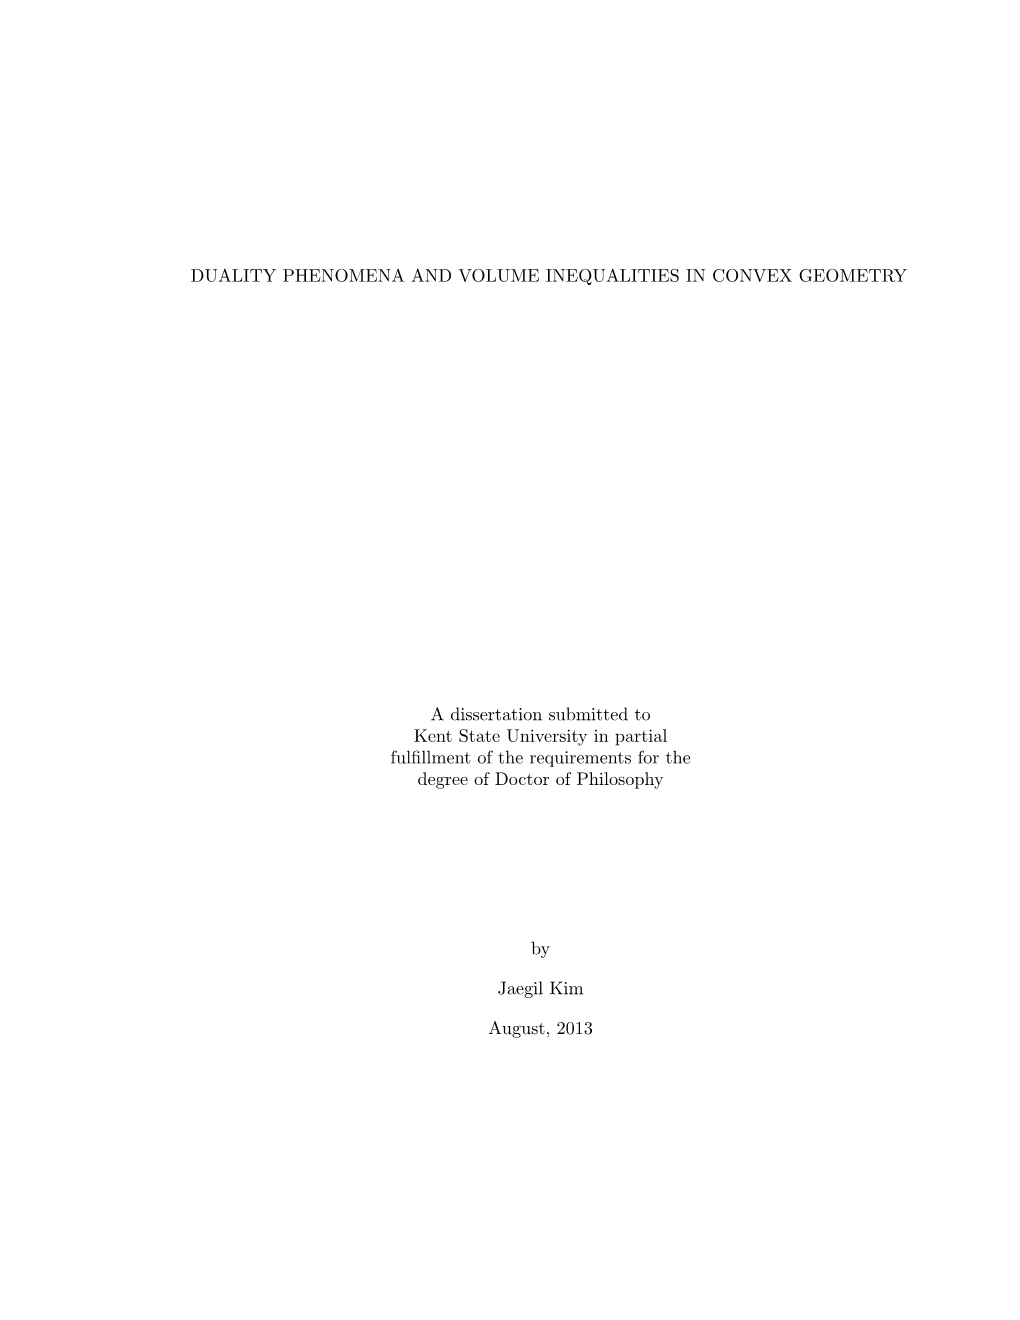 DUALITY PHENOMENA and VOLUME INEQUALITIES in CONVEX GEOMETRY a Dissertation Submitted to Kent State University in Partial Fulfil